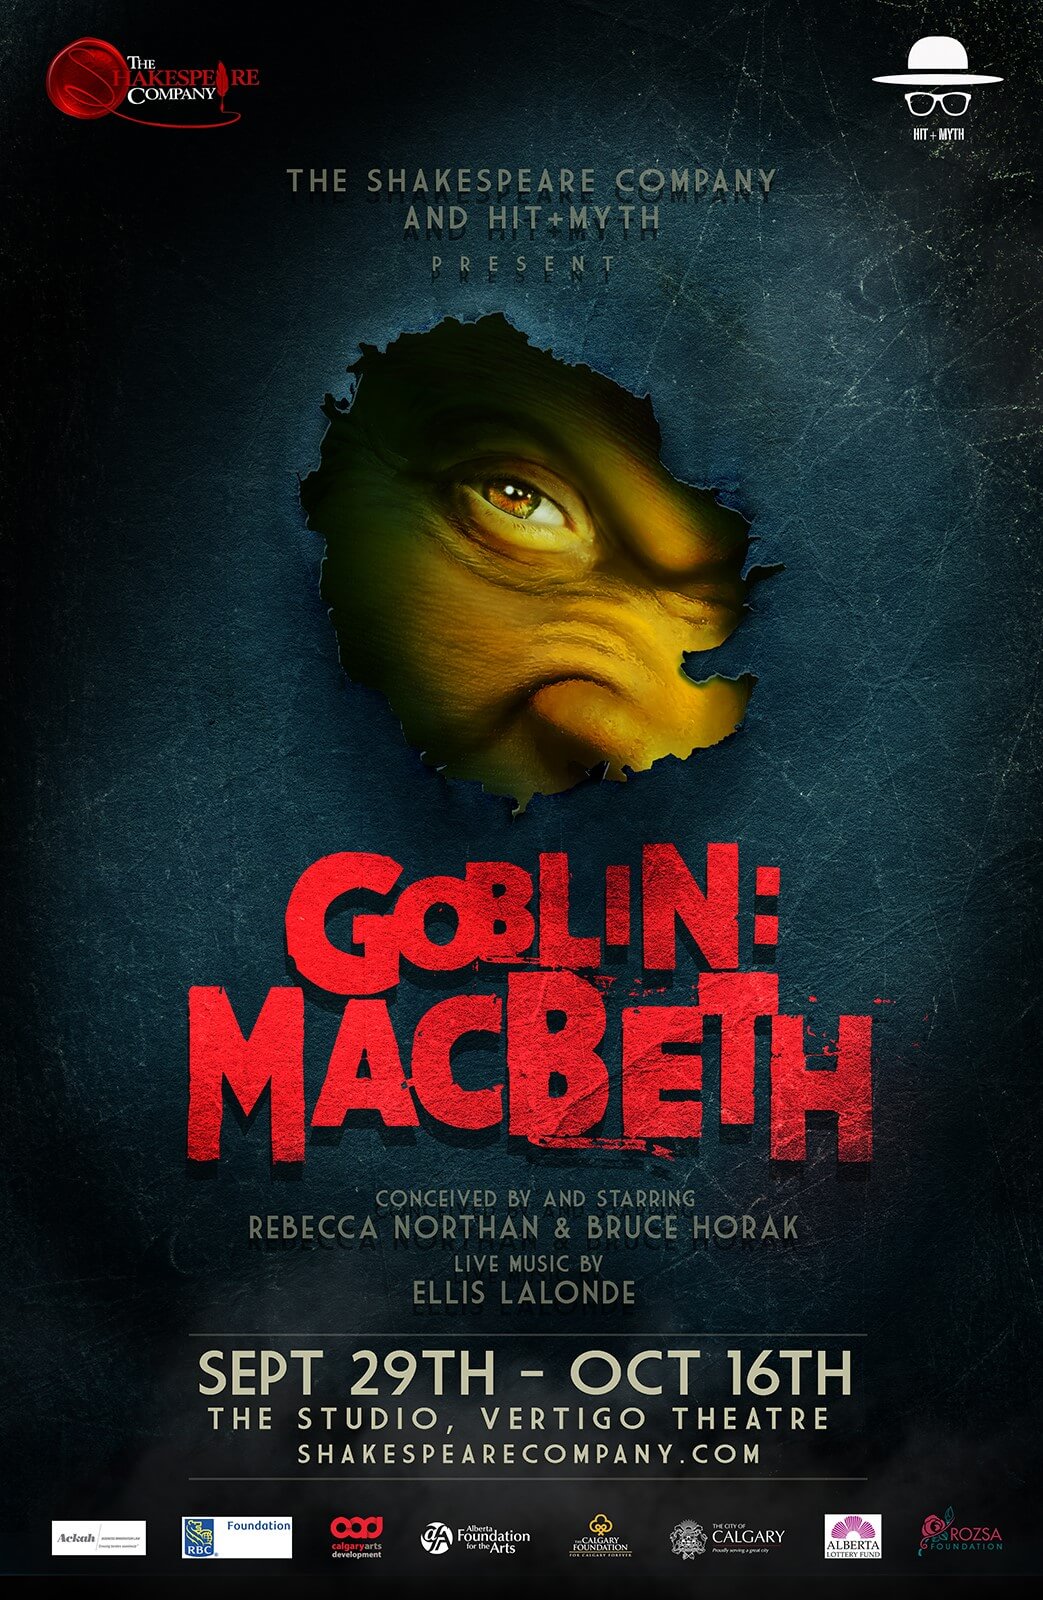 Featured image for “Goblin: Macbeth made it’s world wide premier as part of The Shakespeare Company’s (TSC’s) 2021/22 season.”